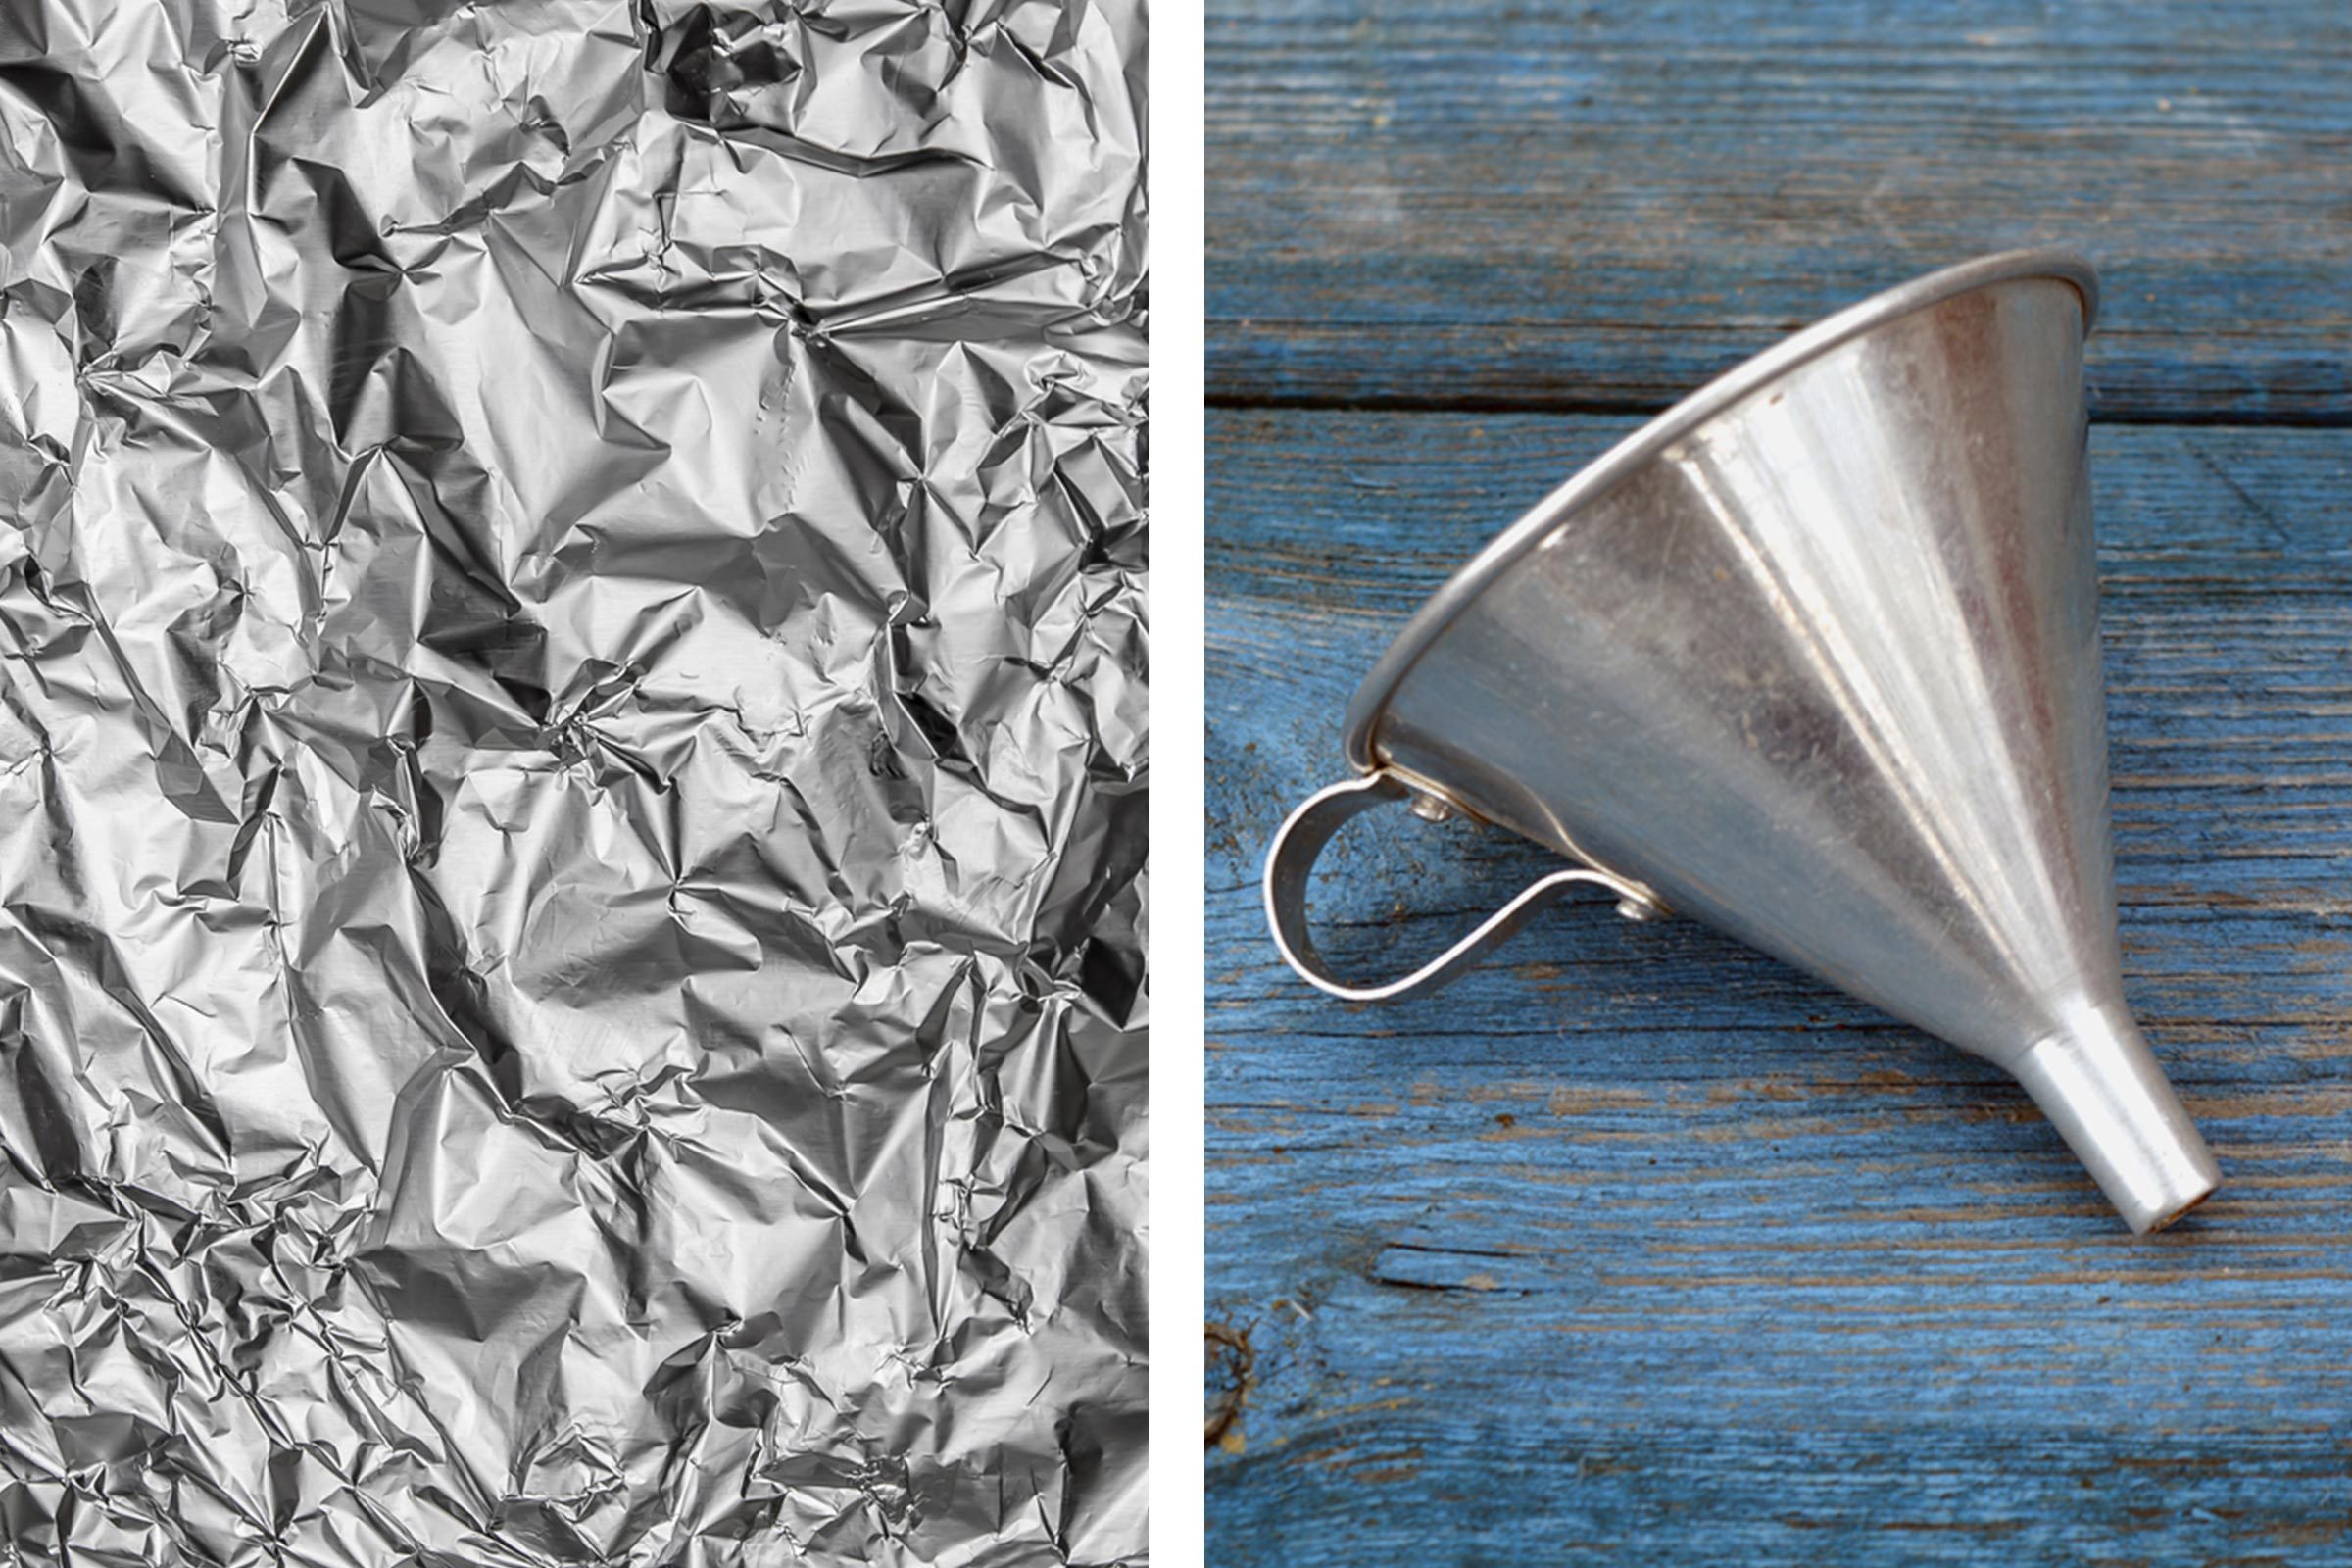 How to Use Aluminum Foil: Food, Cleaning, Crafts